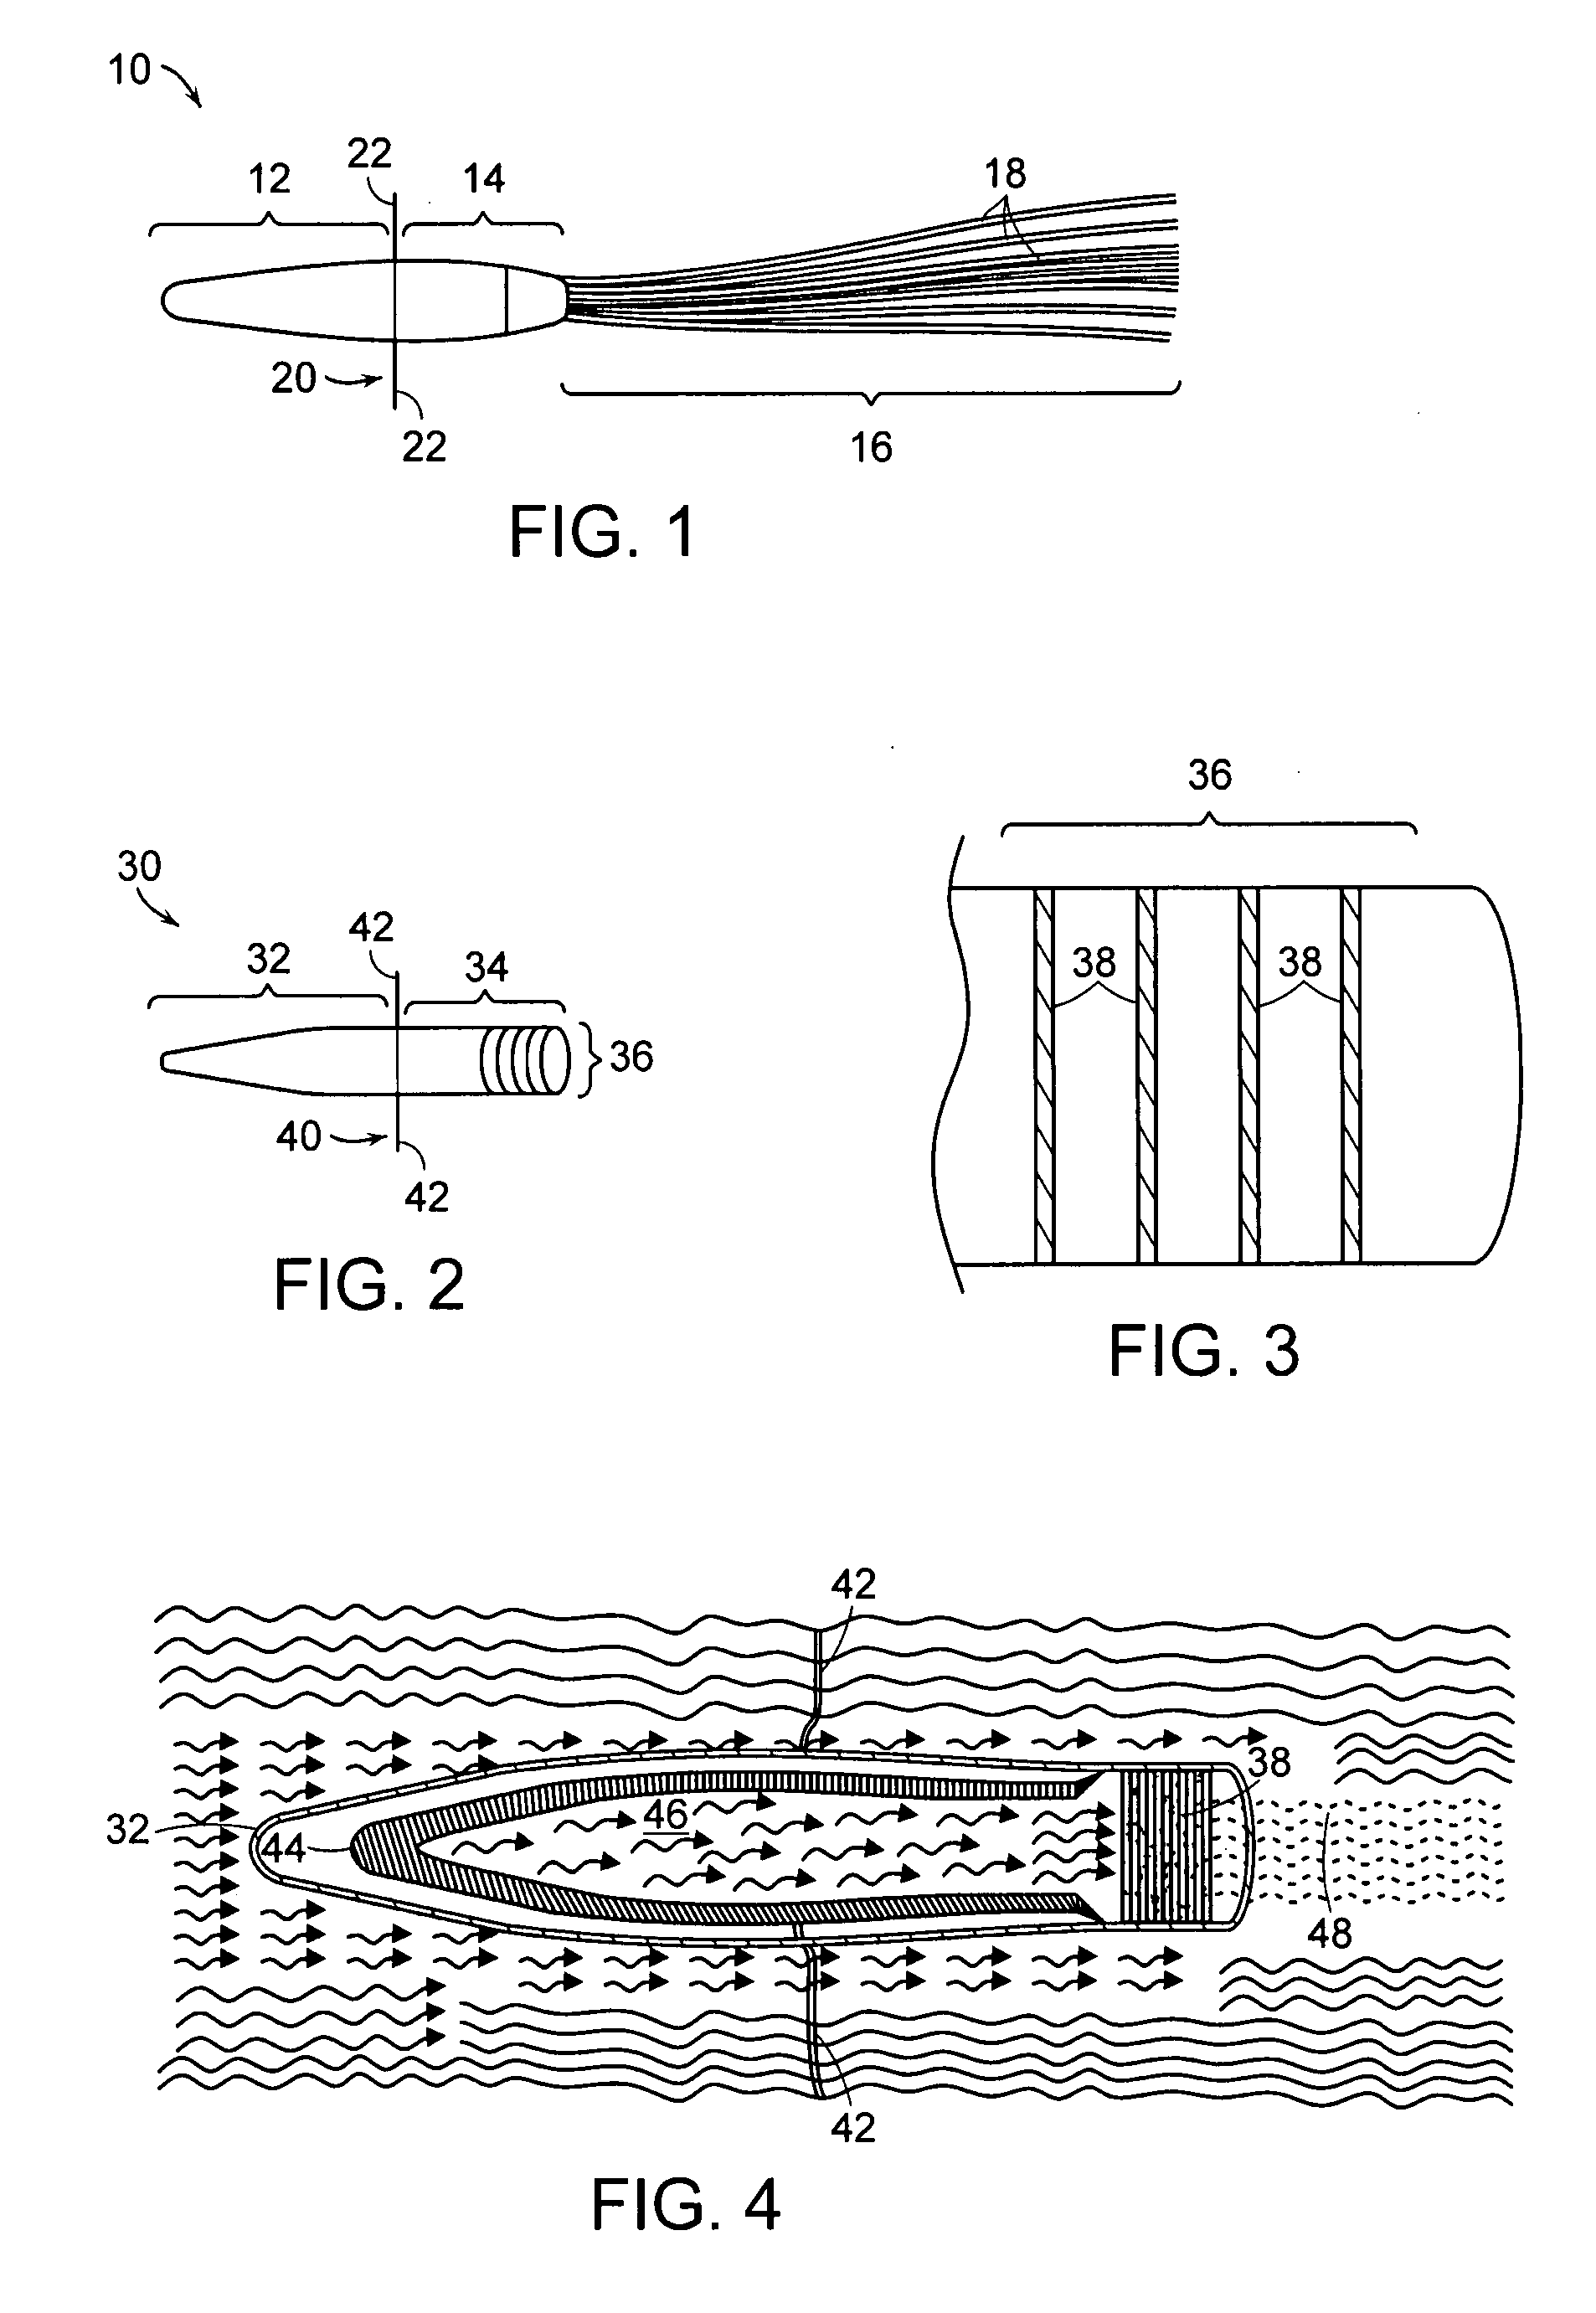 Extracorporeal cell-based therapeutic device and delivery system